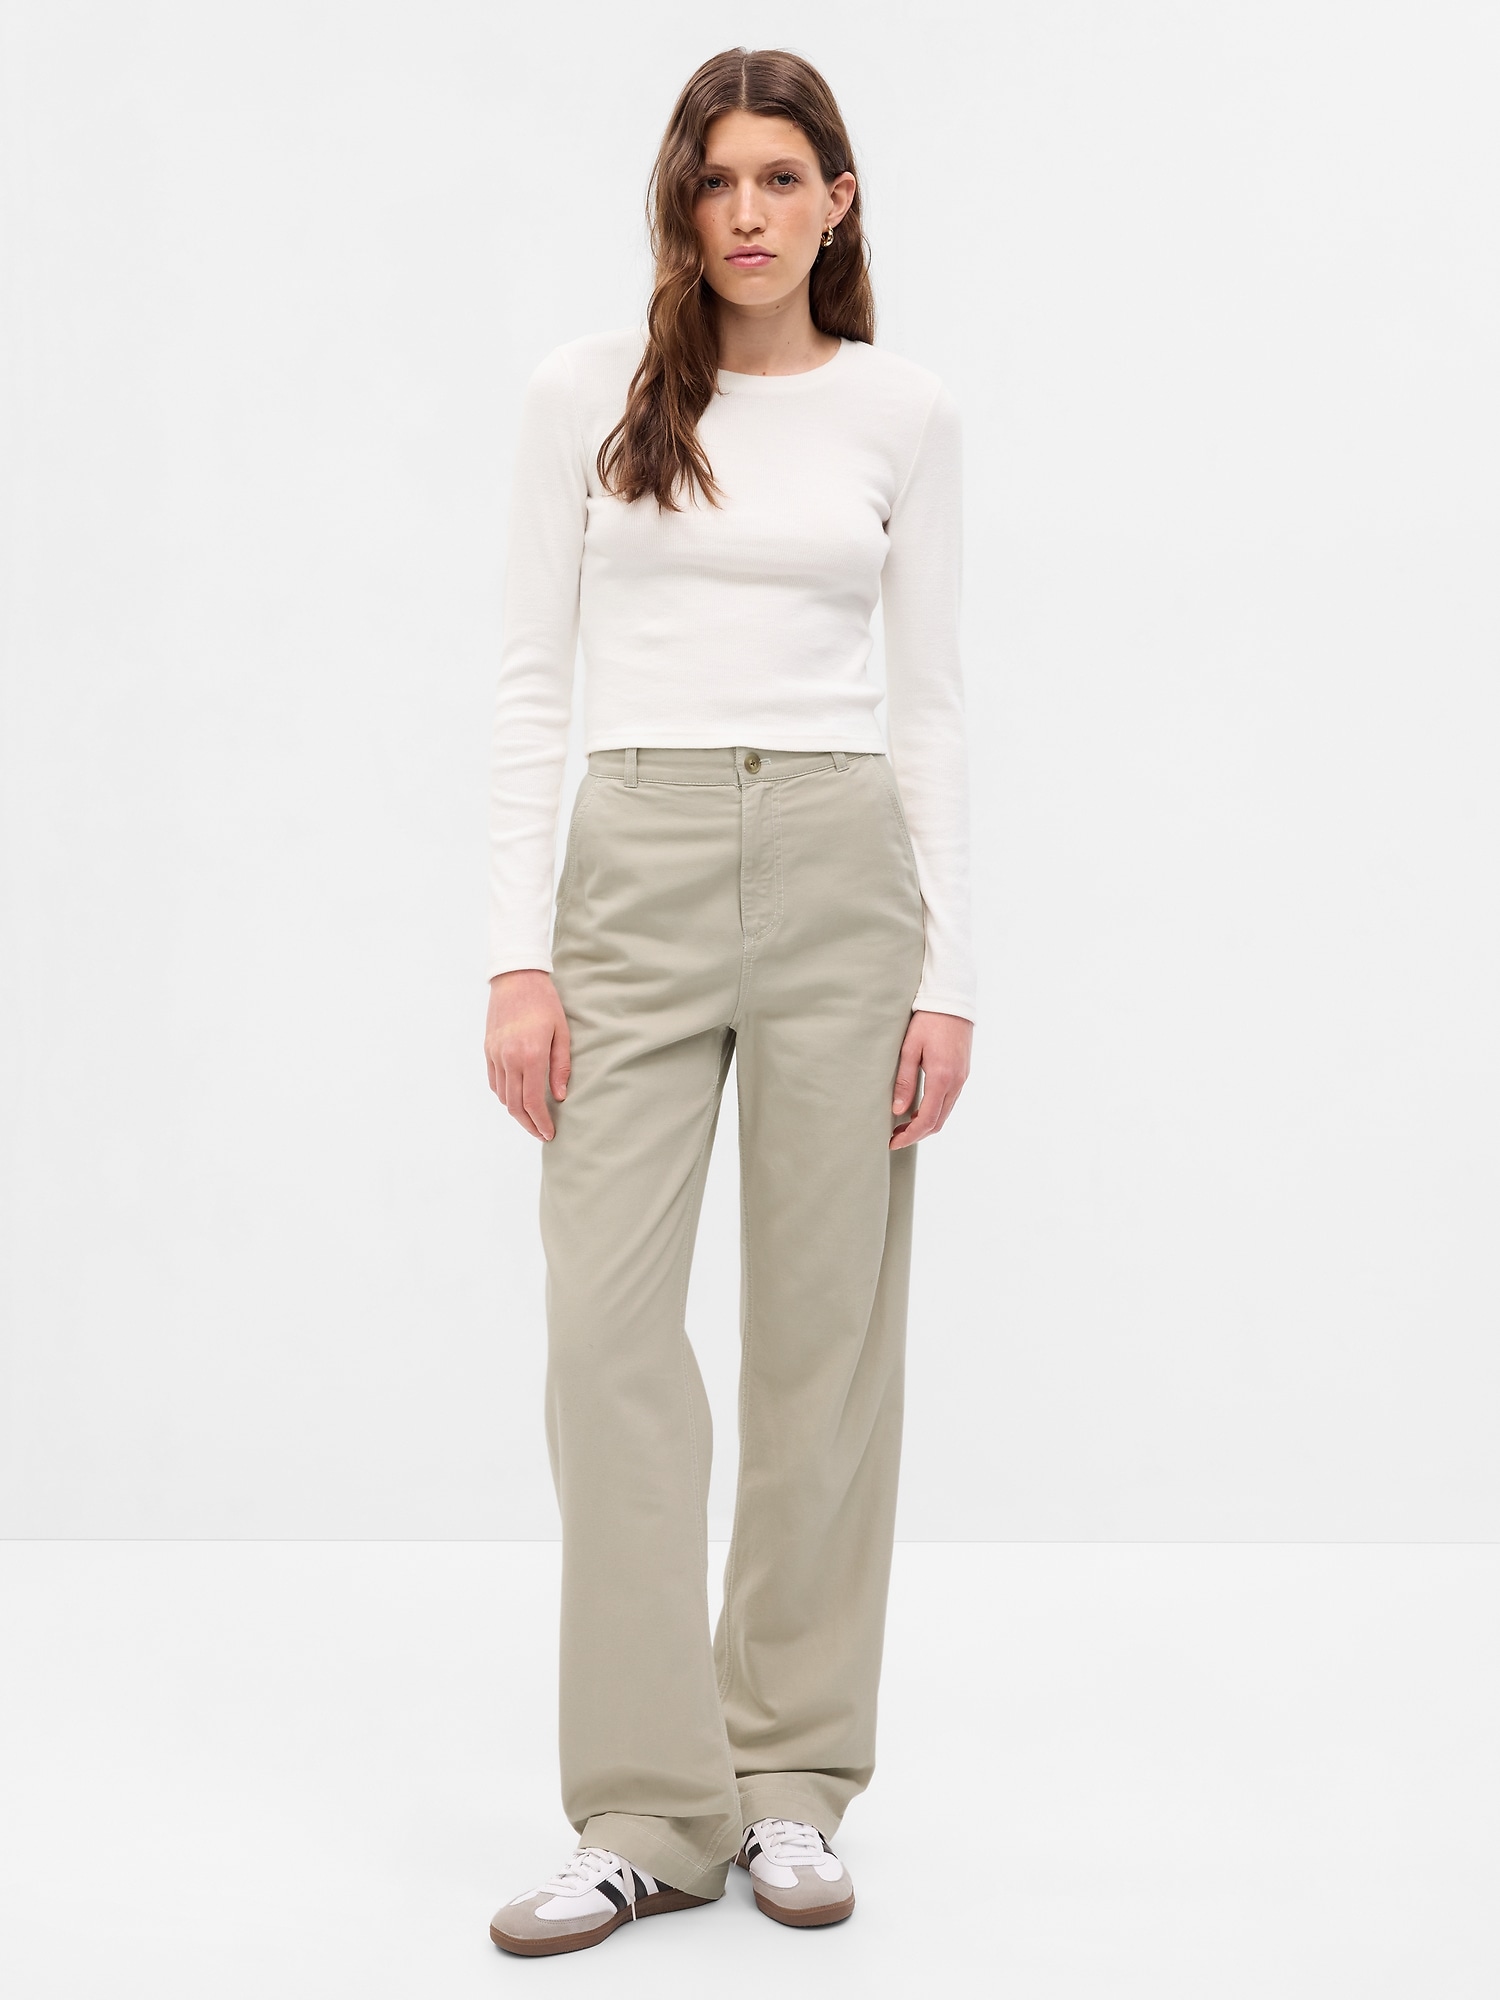 Relaxed Straight Pull-On Pants | Gap